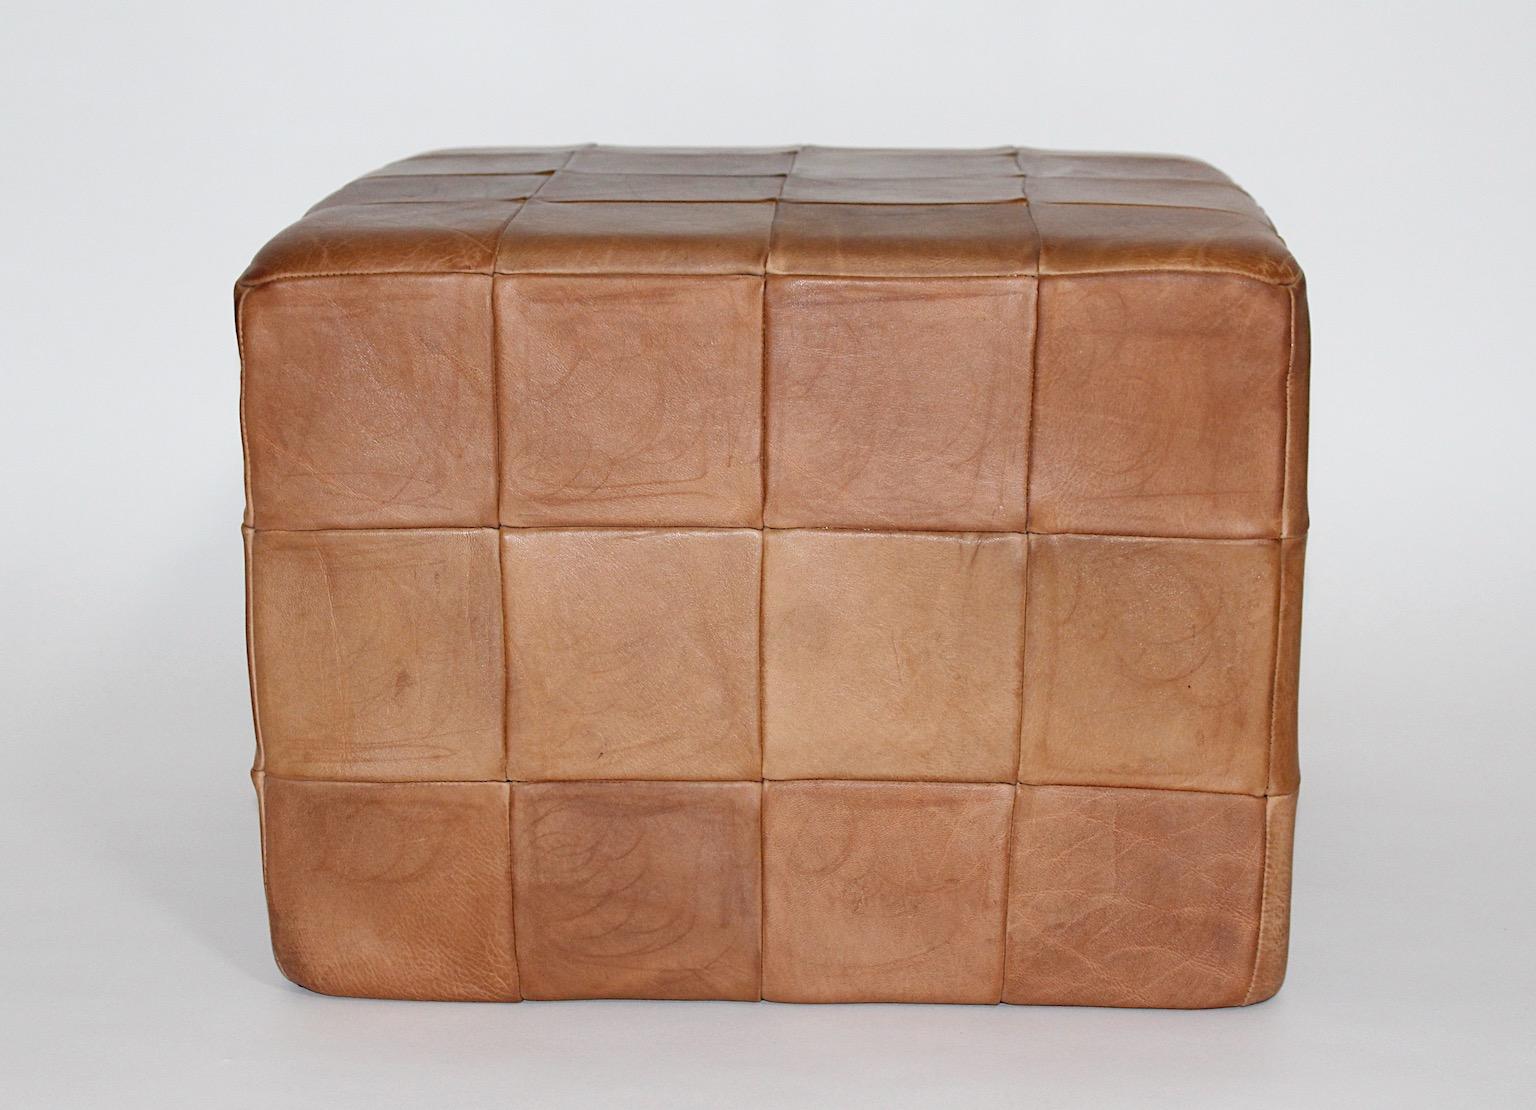 Modernist Organic Vintage Brown Patchwork Leather Cubus Stool DeSede 1970s For Sale 4